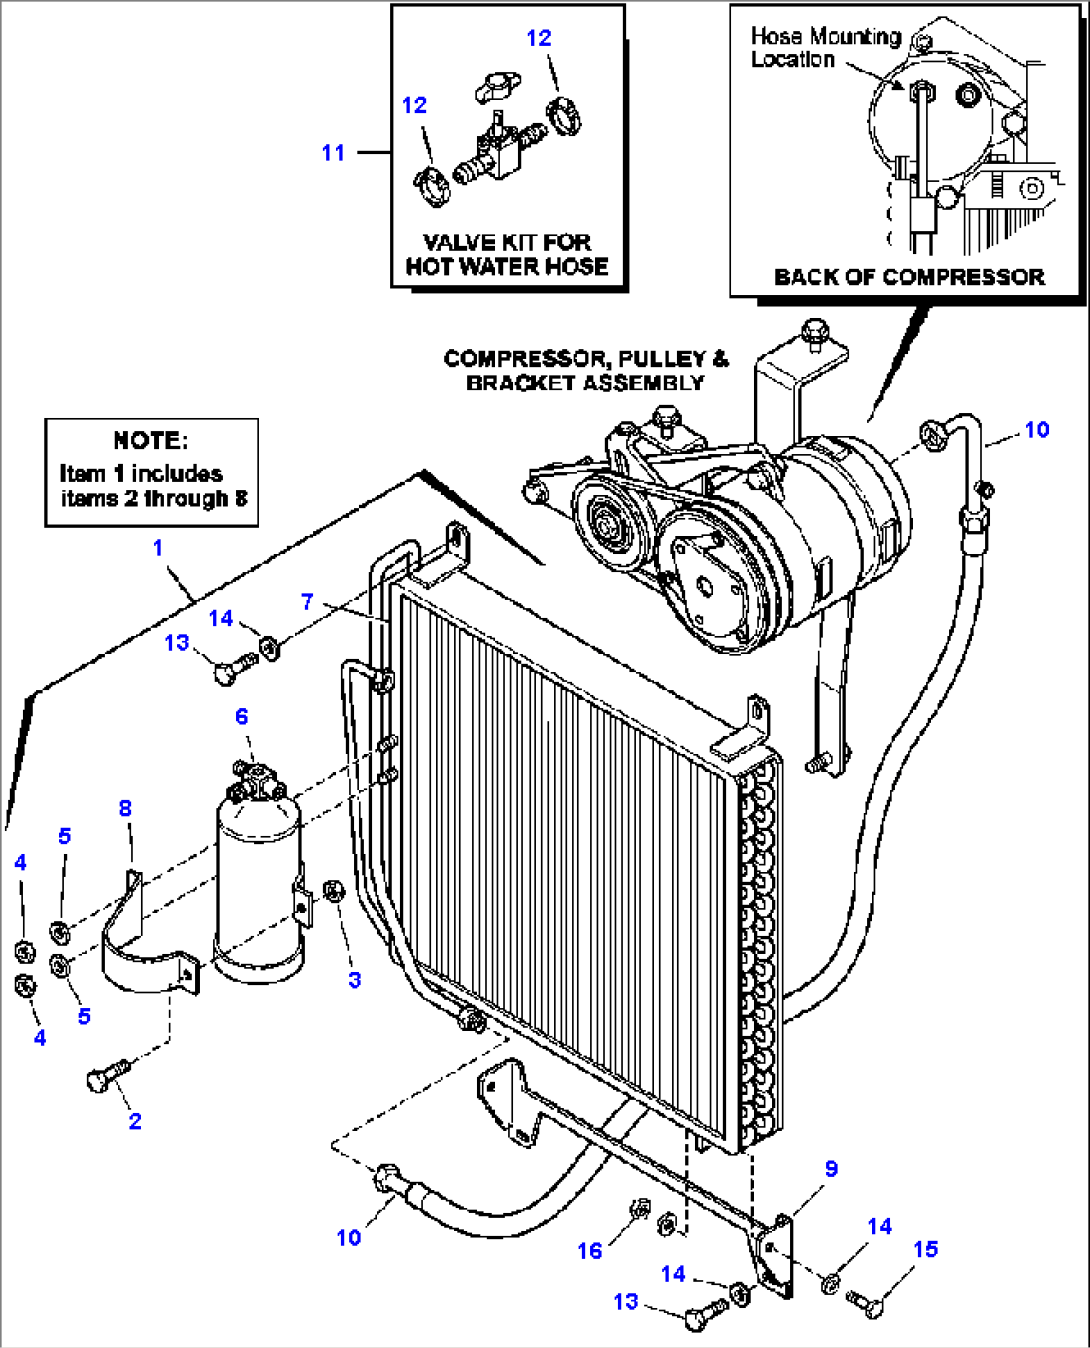 K5021-01A1 AIR CONDITIONING SYSTEM CONDENSER, DRYER, AND CONNECTIONS